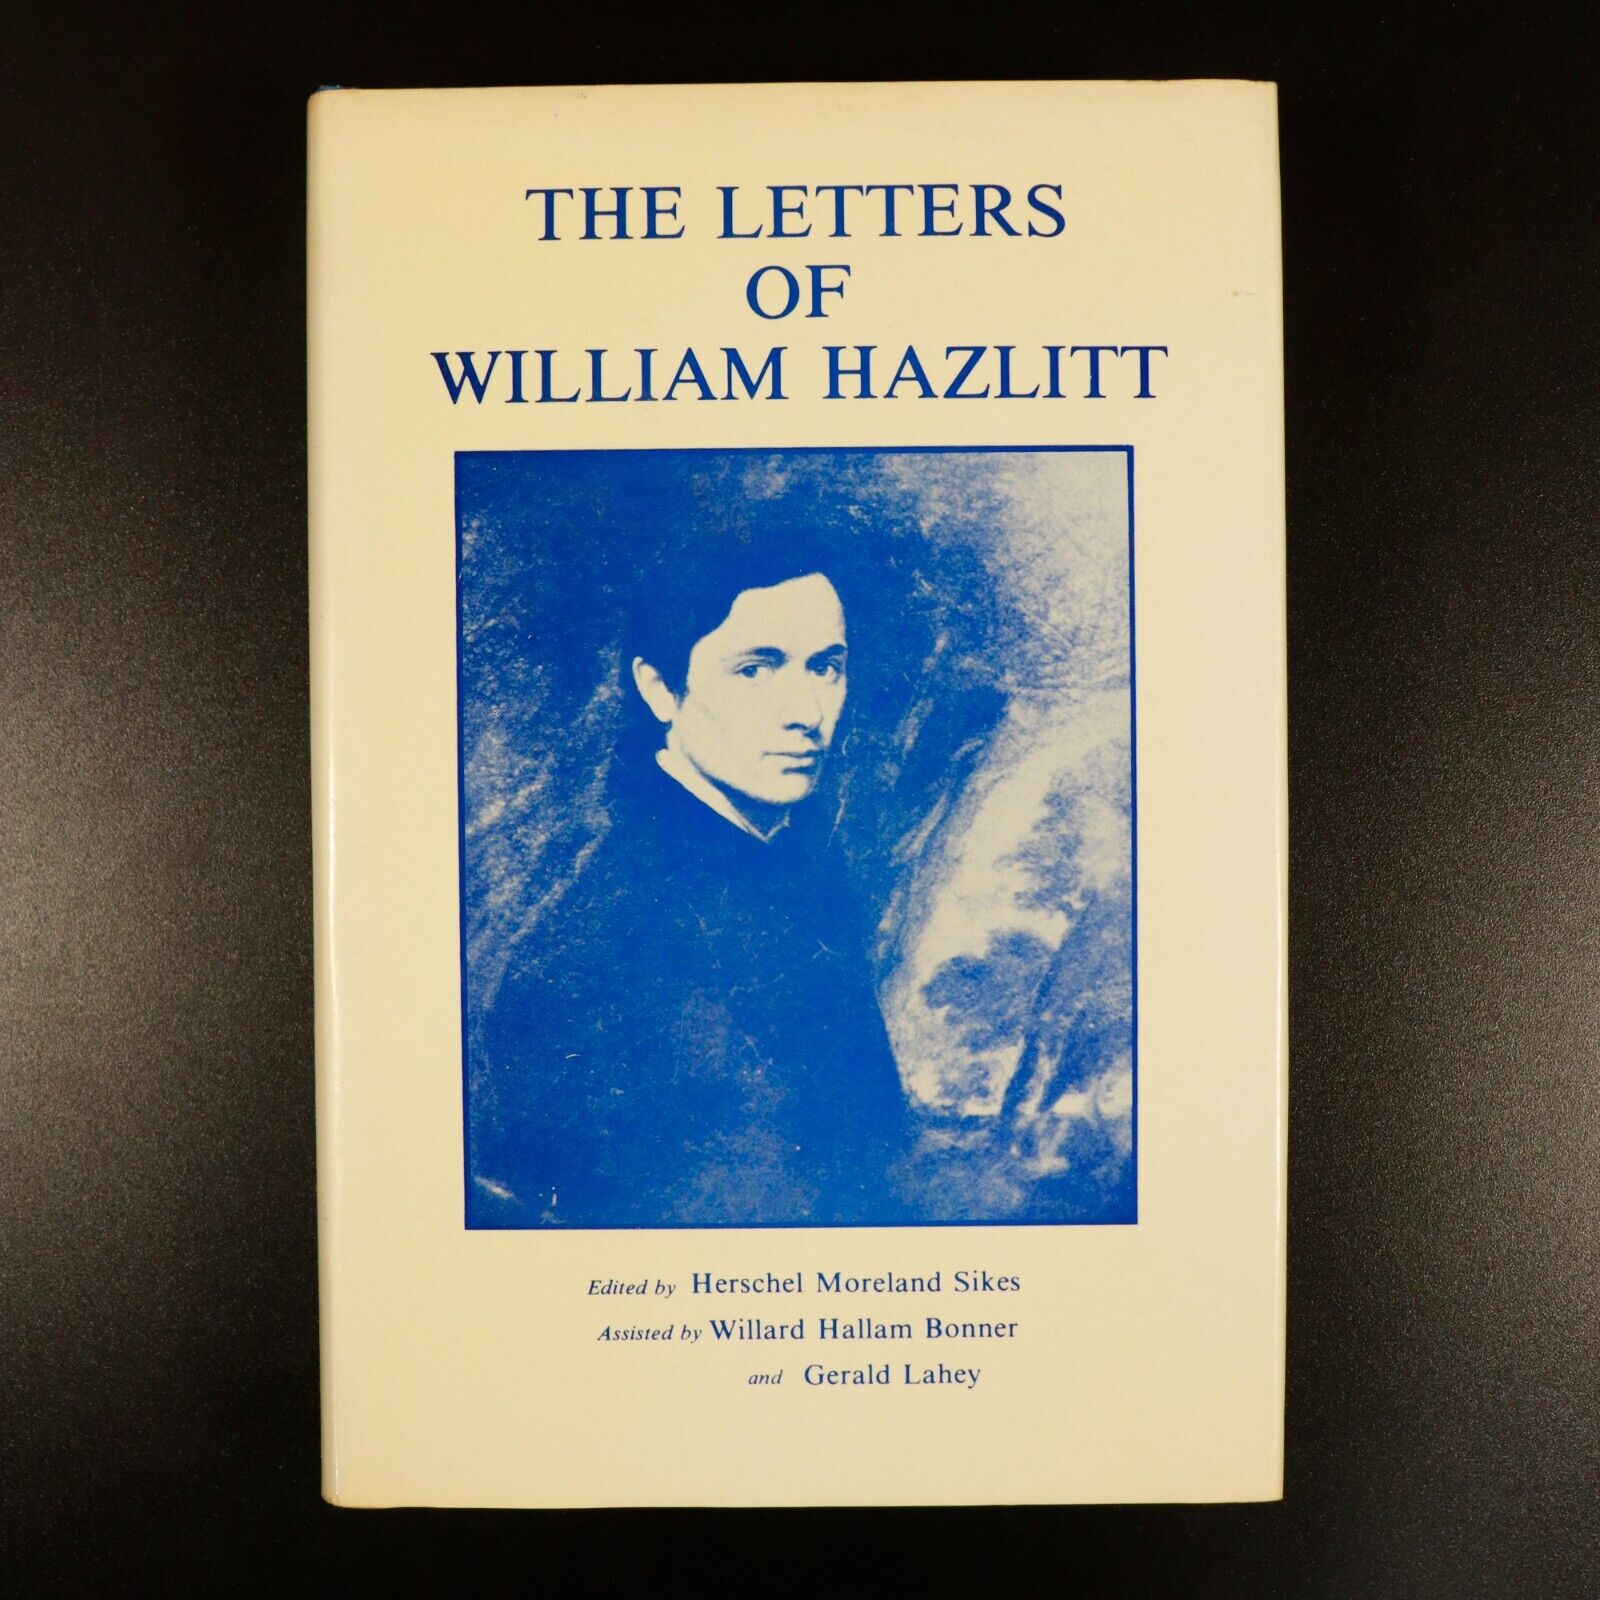 1979 Letters Of William Hazlitt by H. Moreland Sikes British History Book 1st Ed